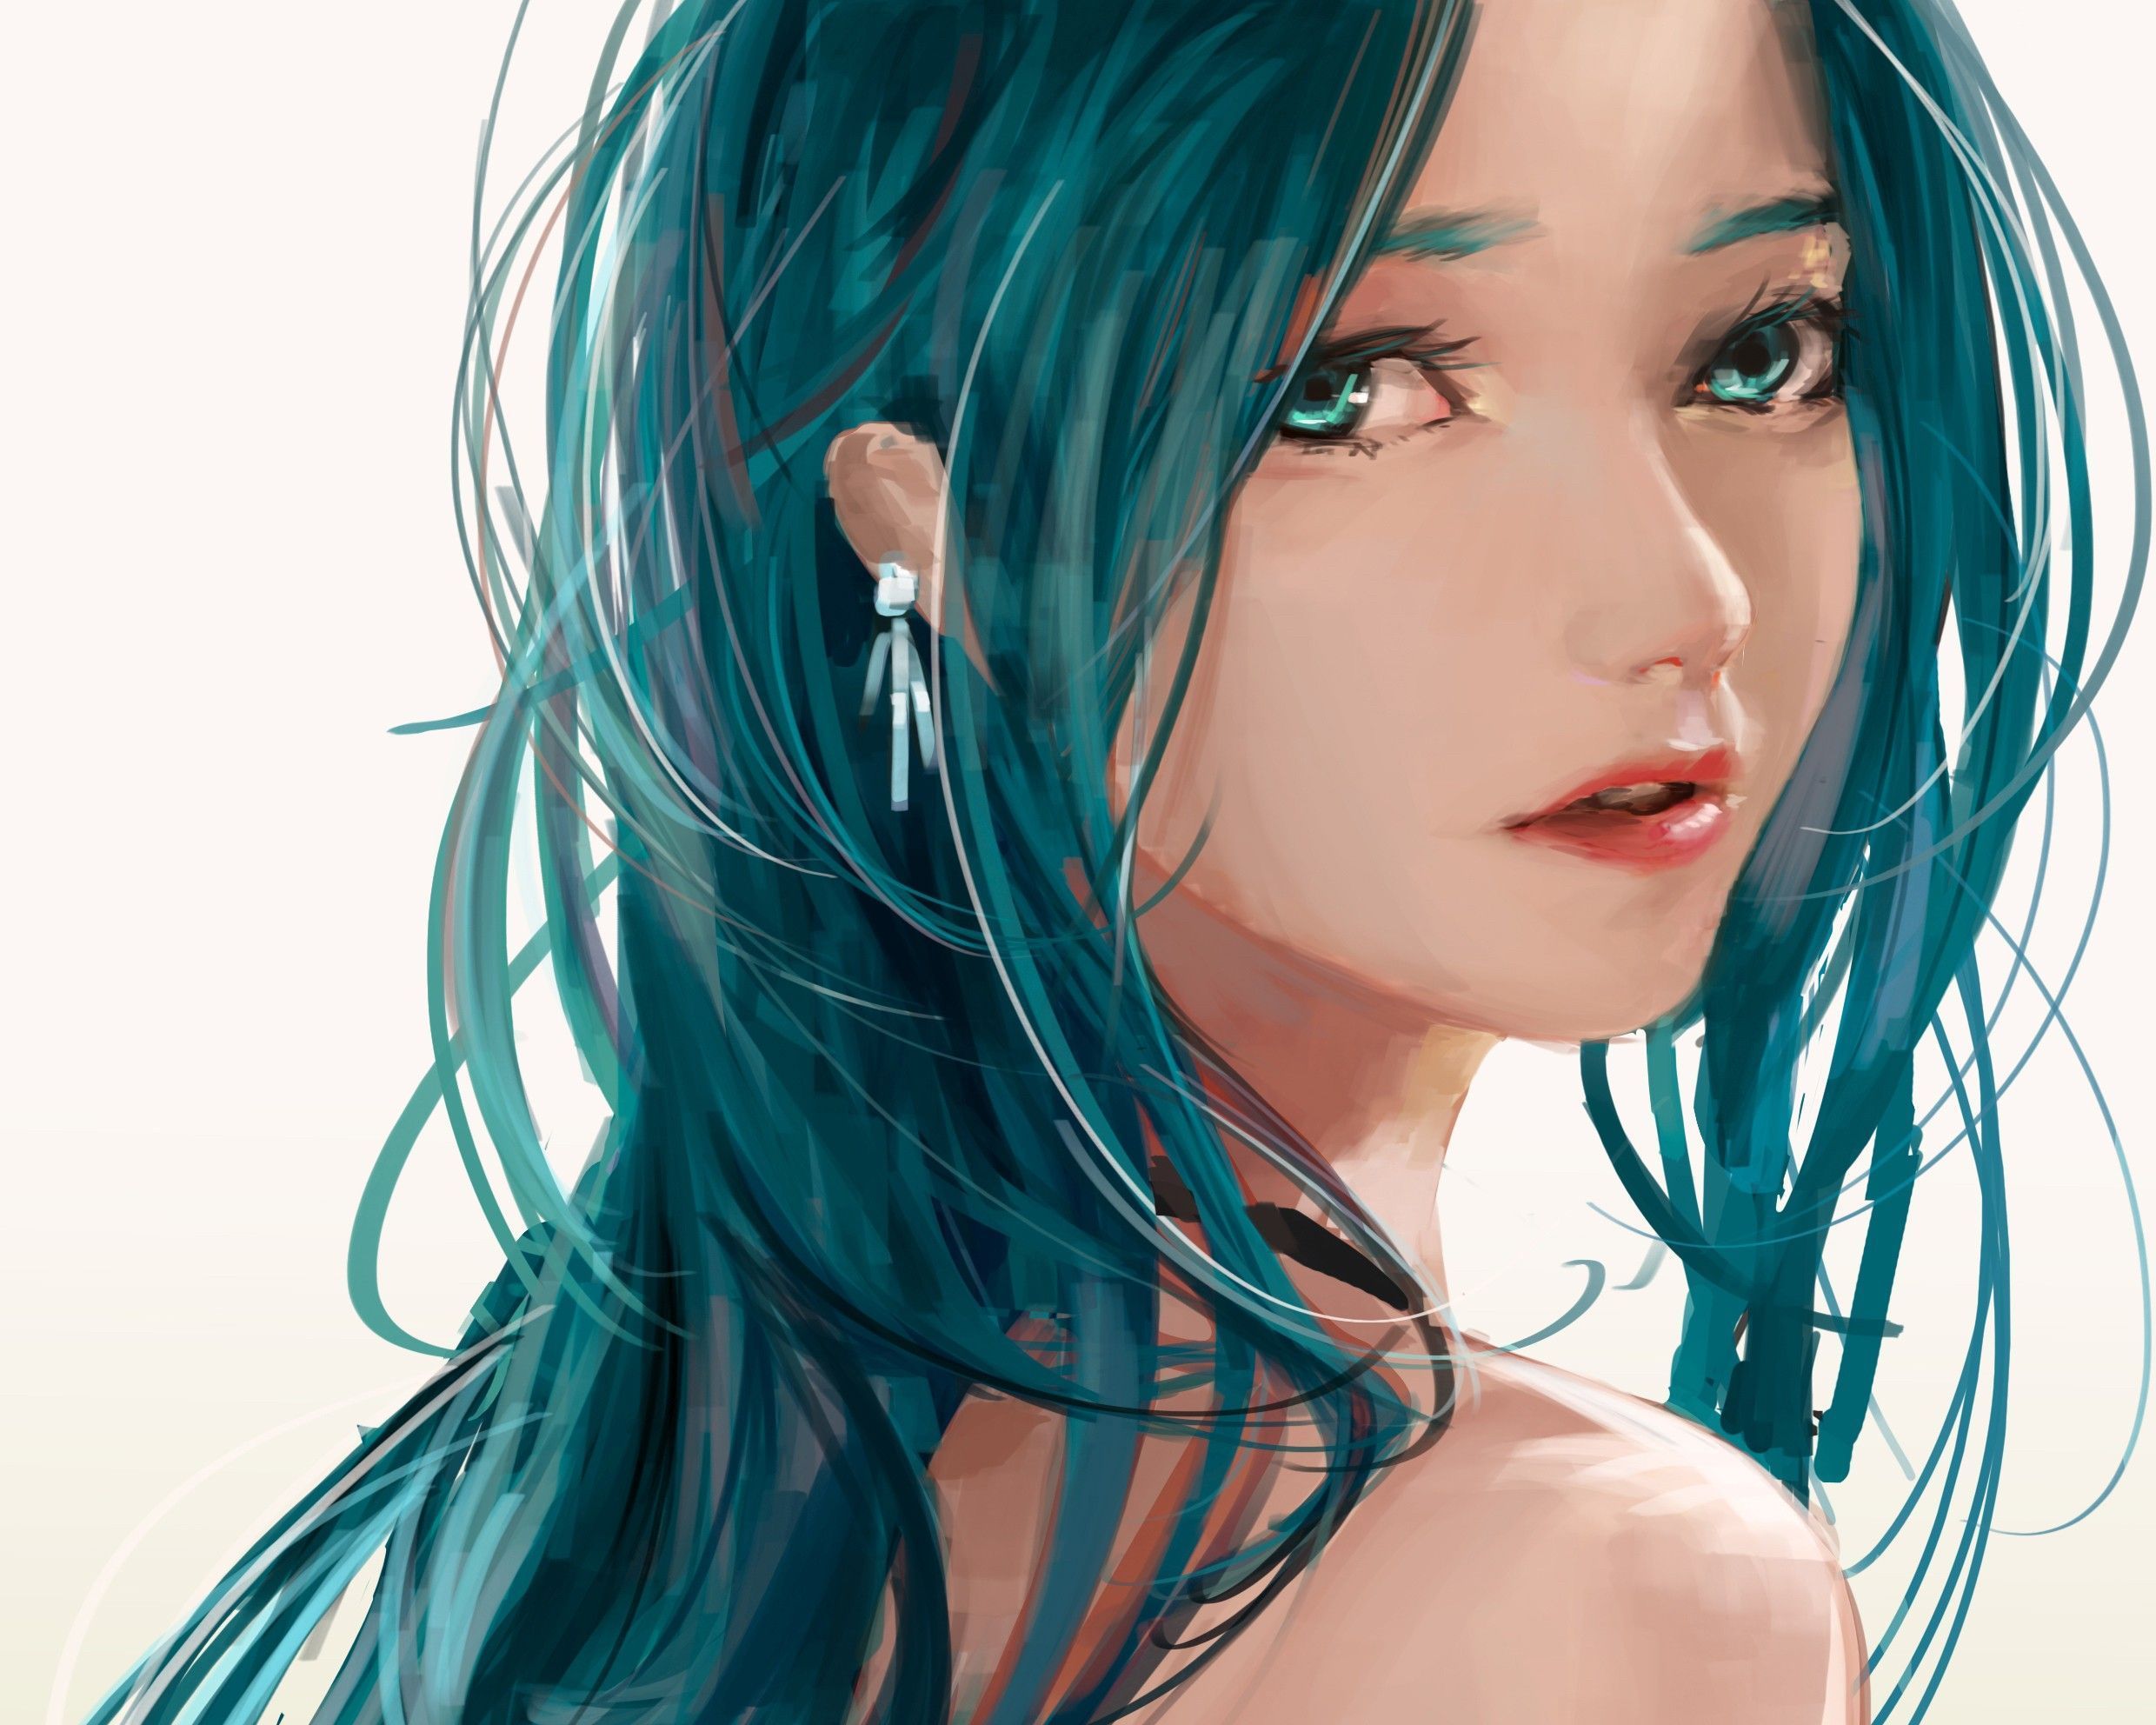 8. Pretty Anime Girls with Blue Hair - wide 1